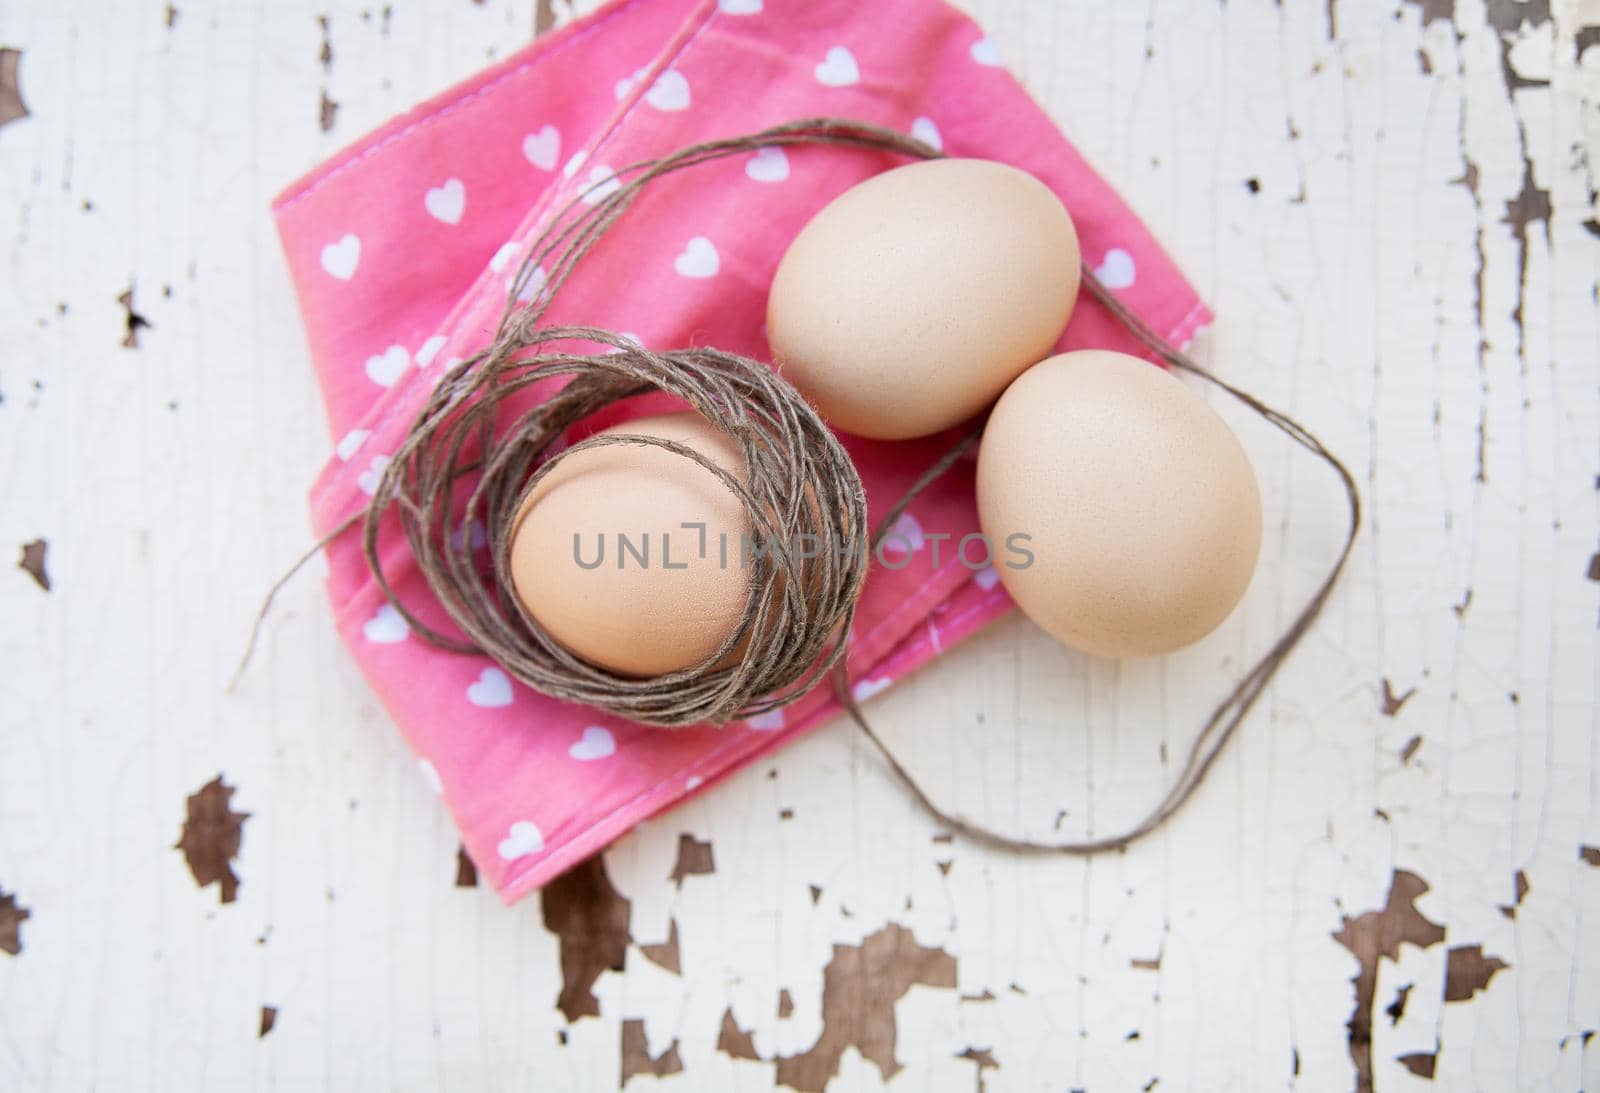 Eggs on tablecloth over wooden background by sfinks